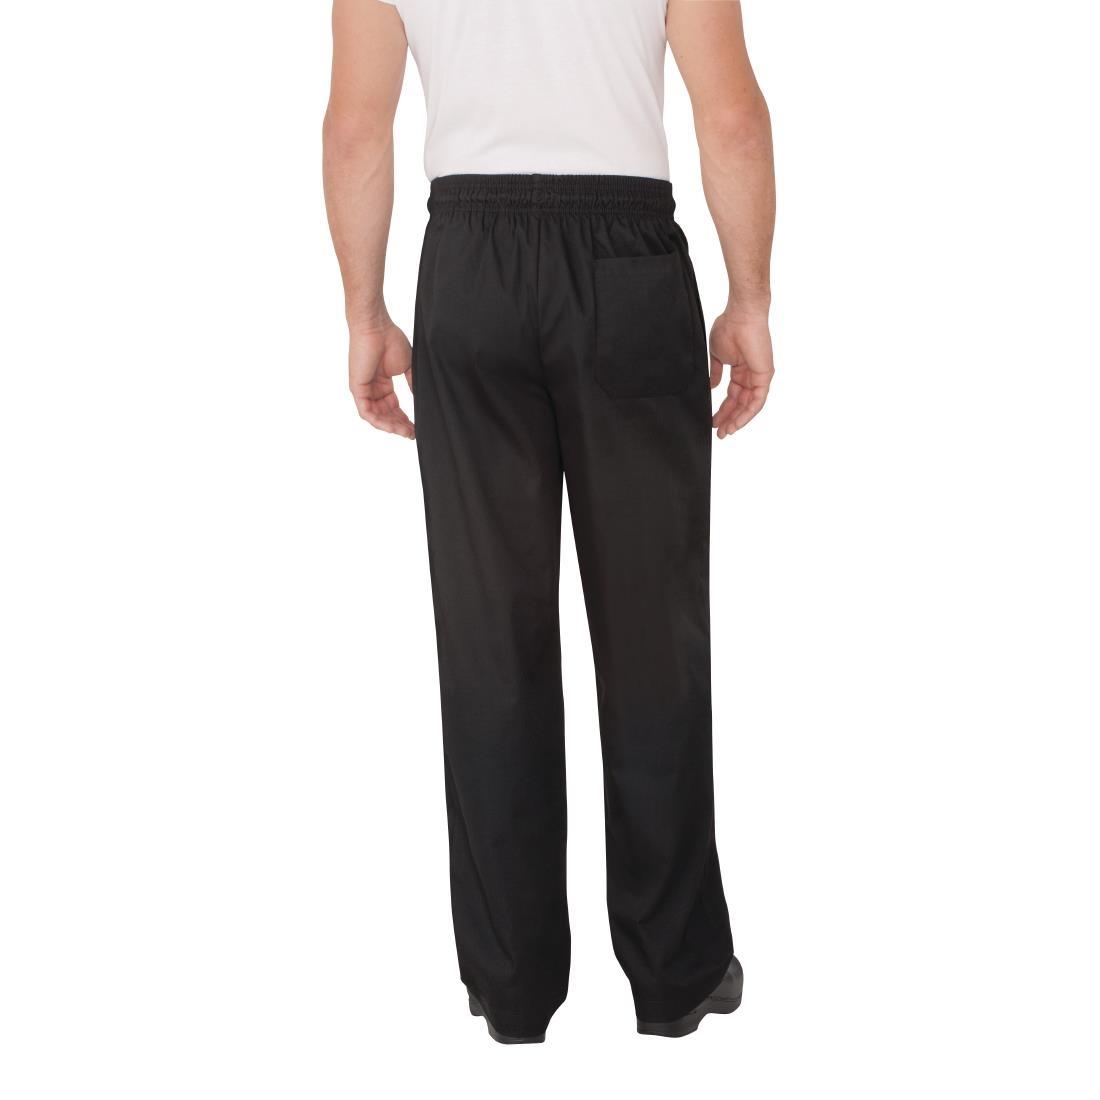 Chef Works Essential Baggy Trousers Black XL - A029-XL  - 5